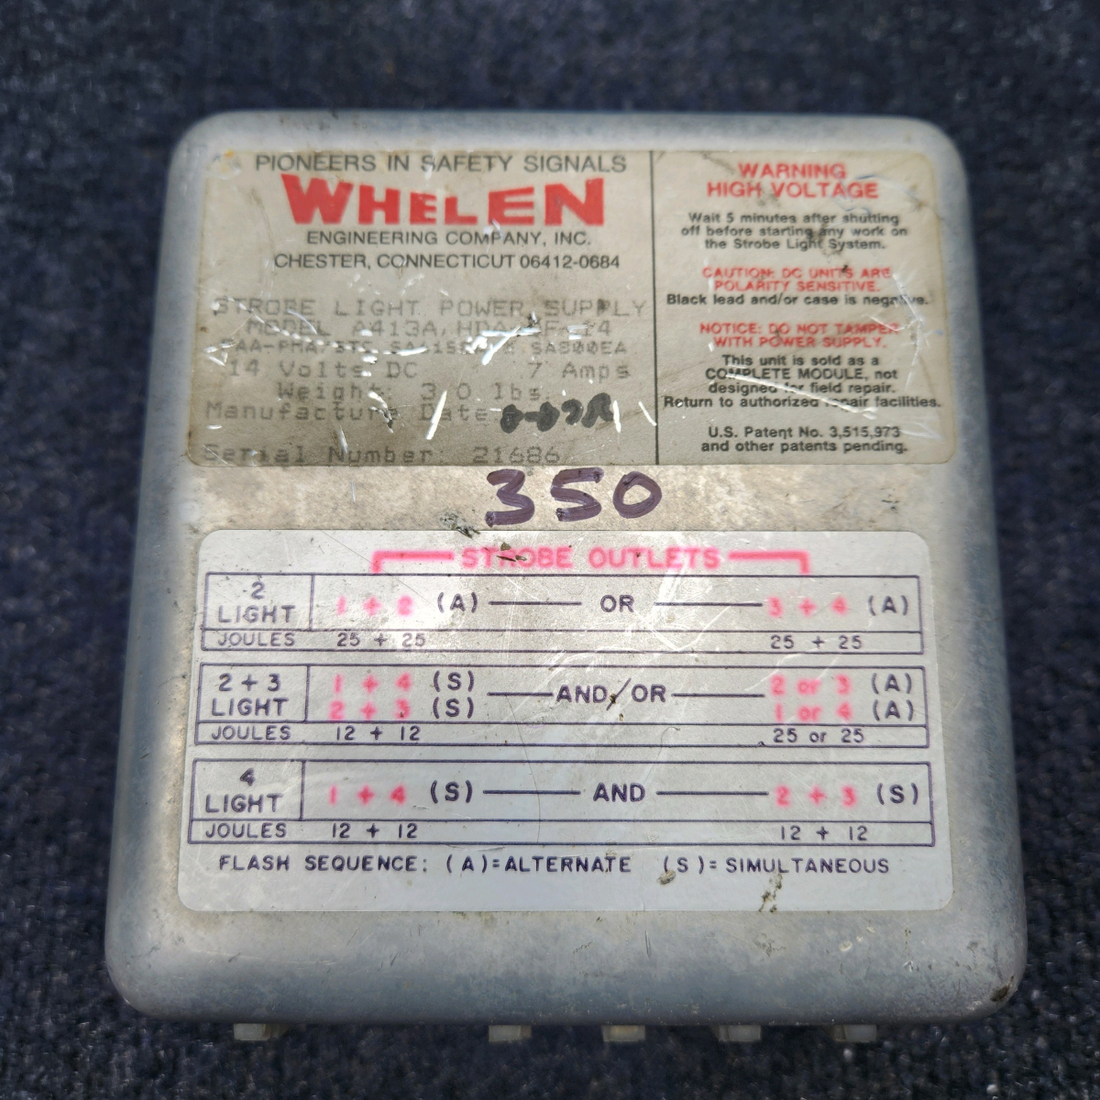 Used aircraft parts for sale, A413A, HDA-DF-14 Whelen Strobe Power Supply WHELEN STROBE LIGHT POWER SUPPLY 14 VOLTS